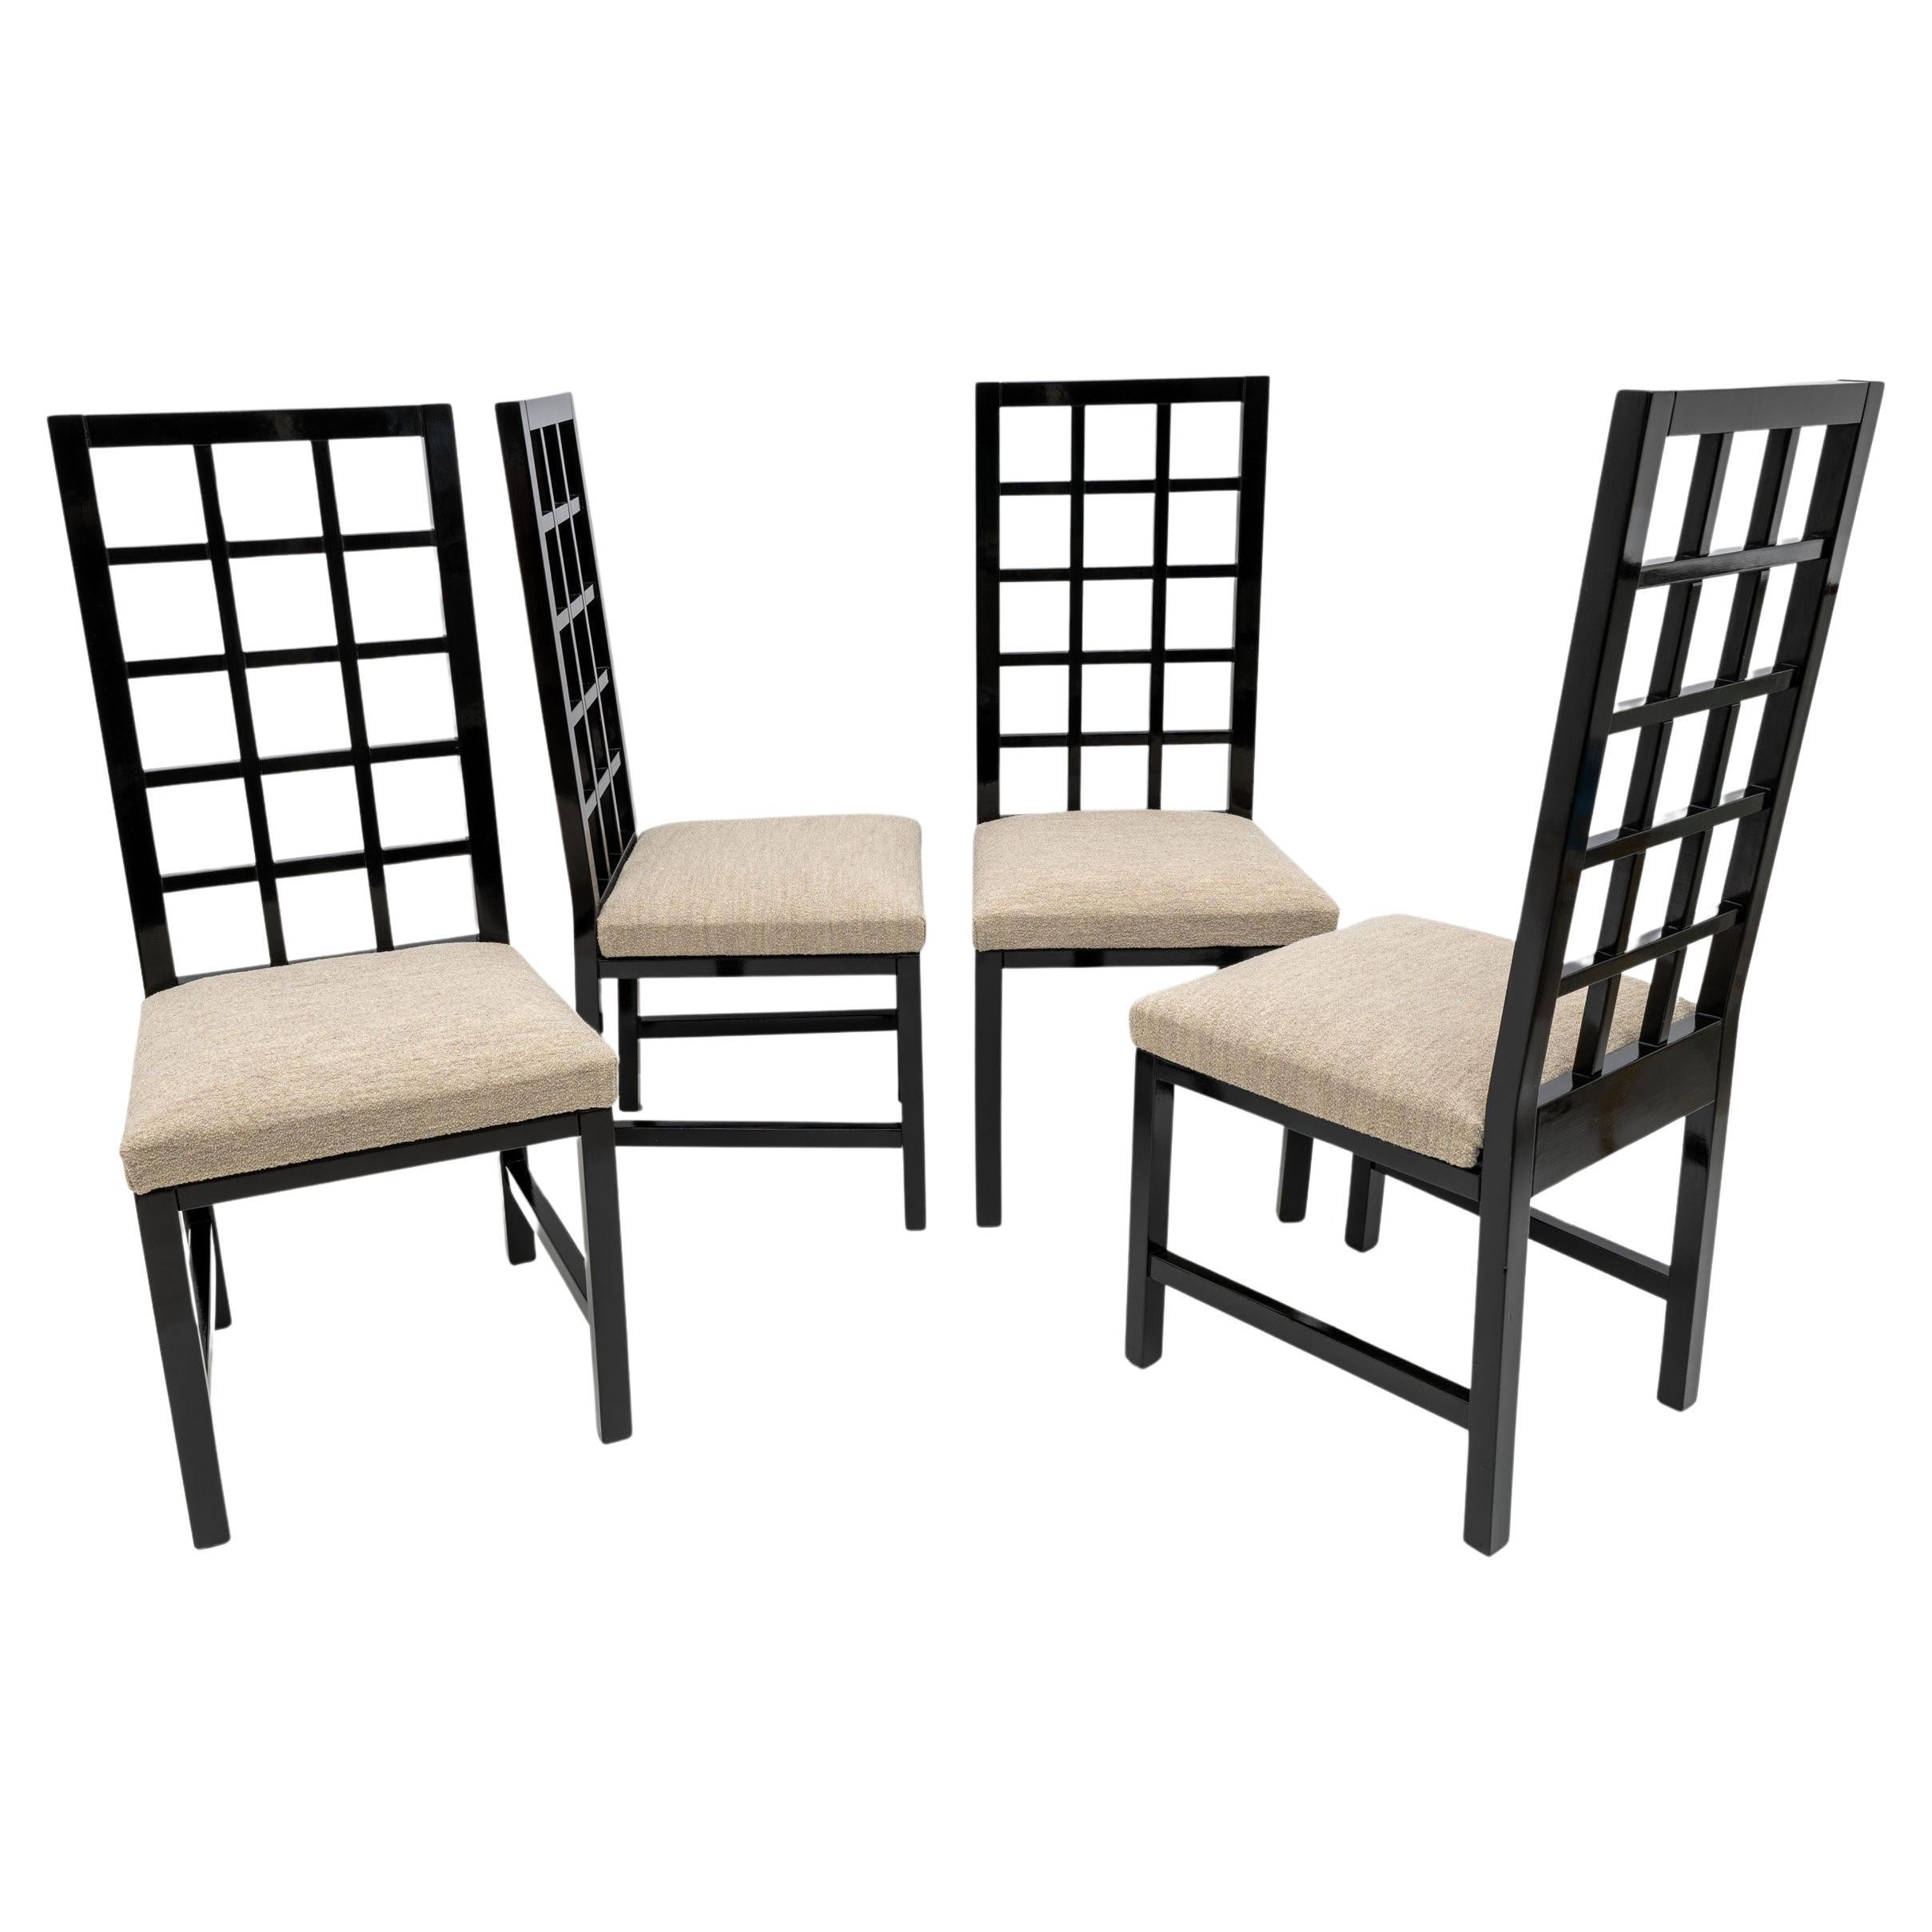 Four Mackintosh Style Black Lacquered High Back Chairs, 1979 For Sale